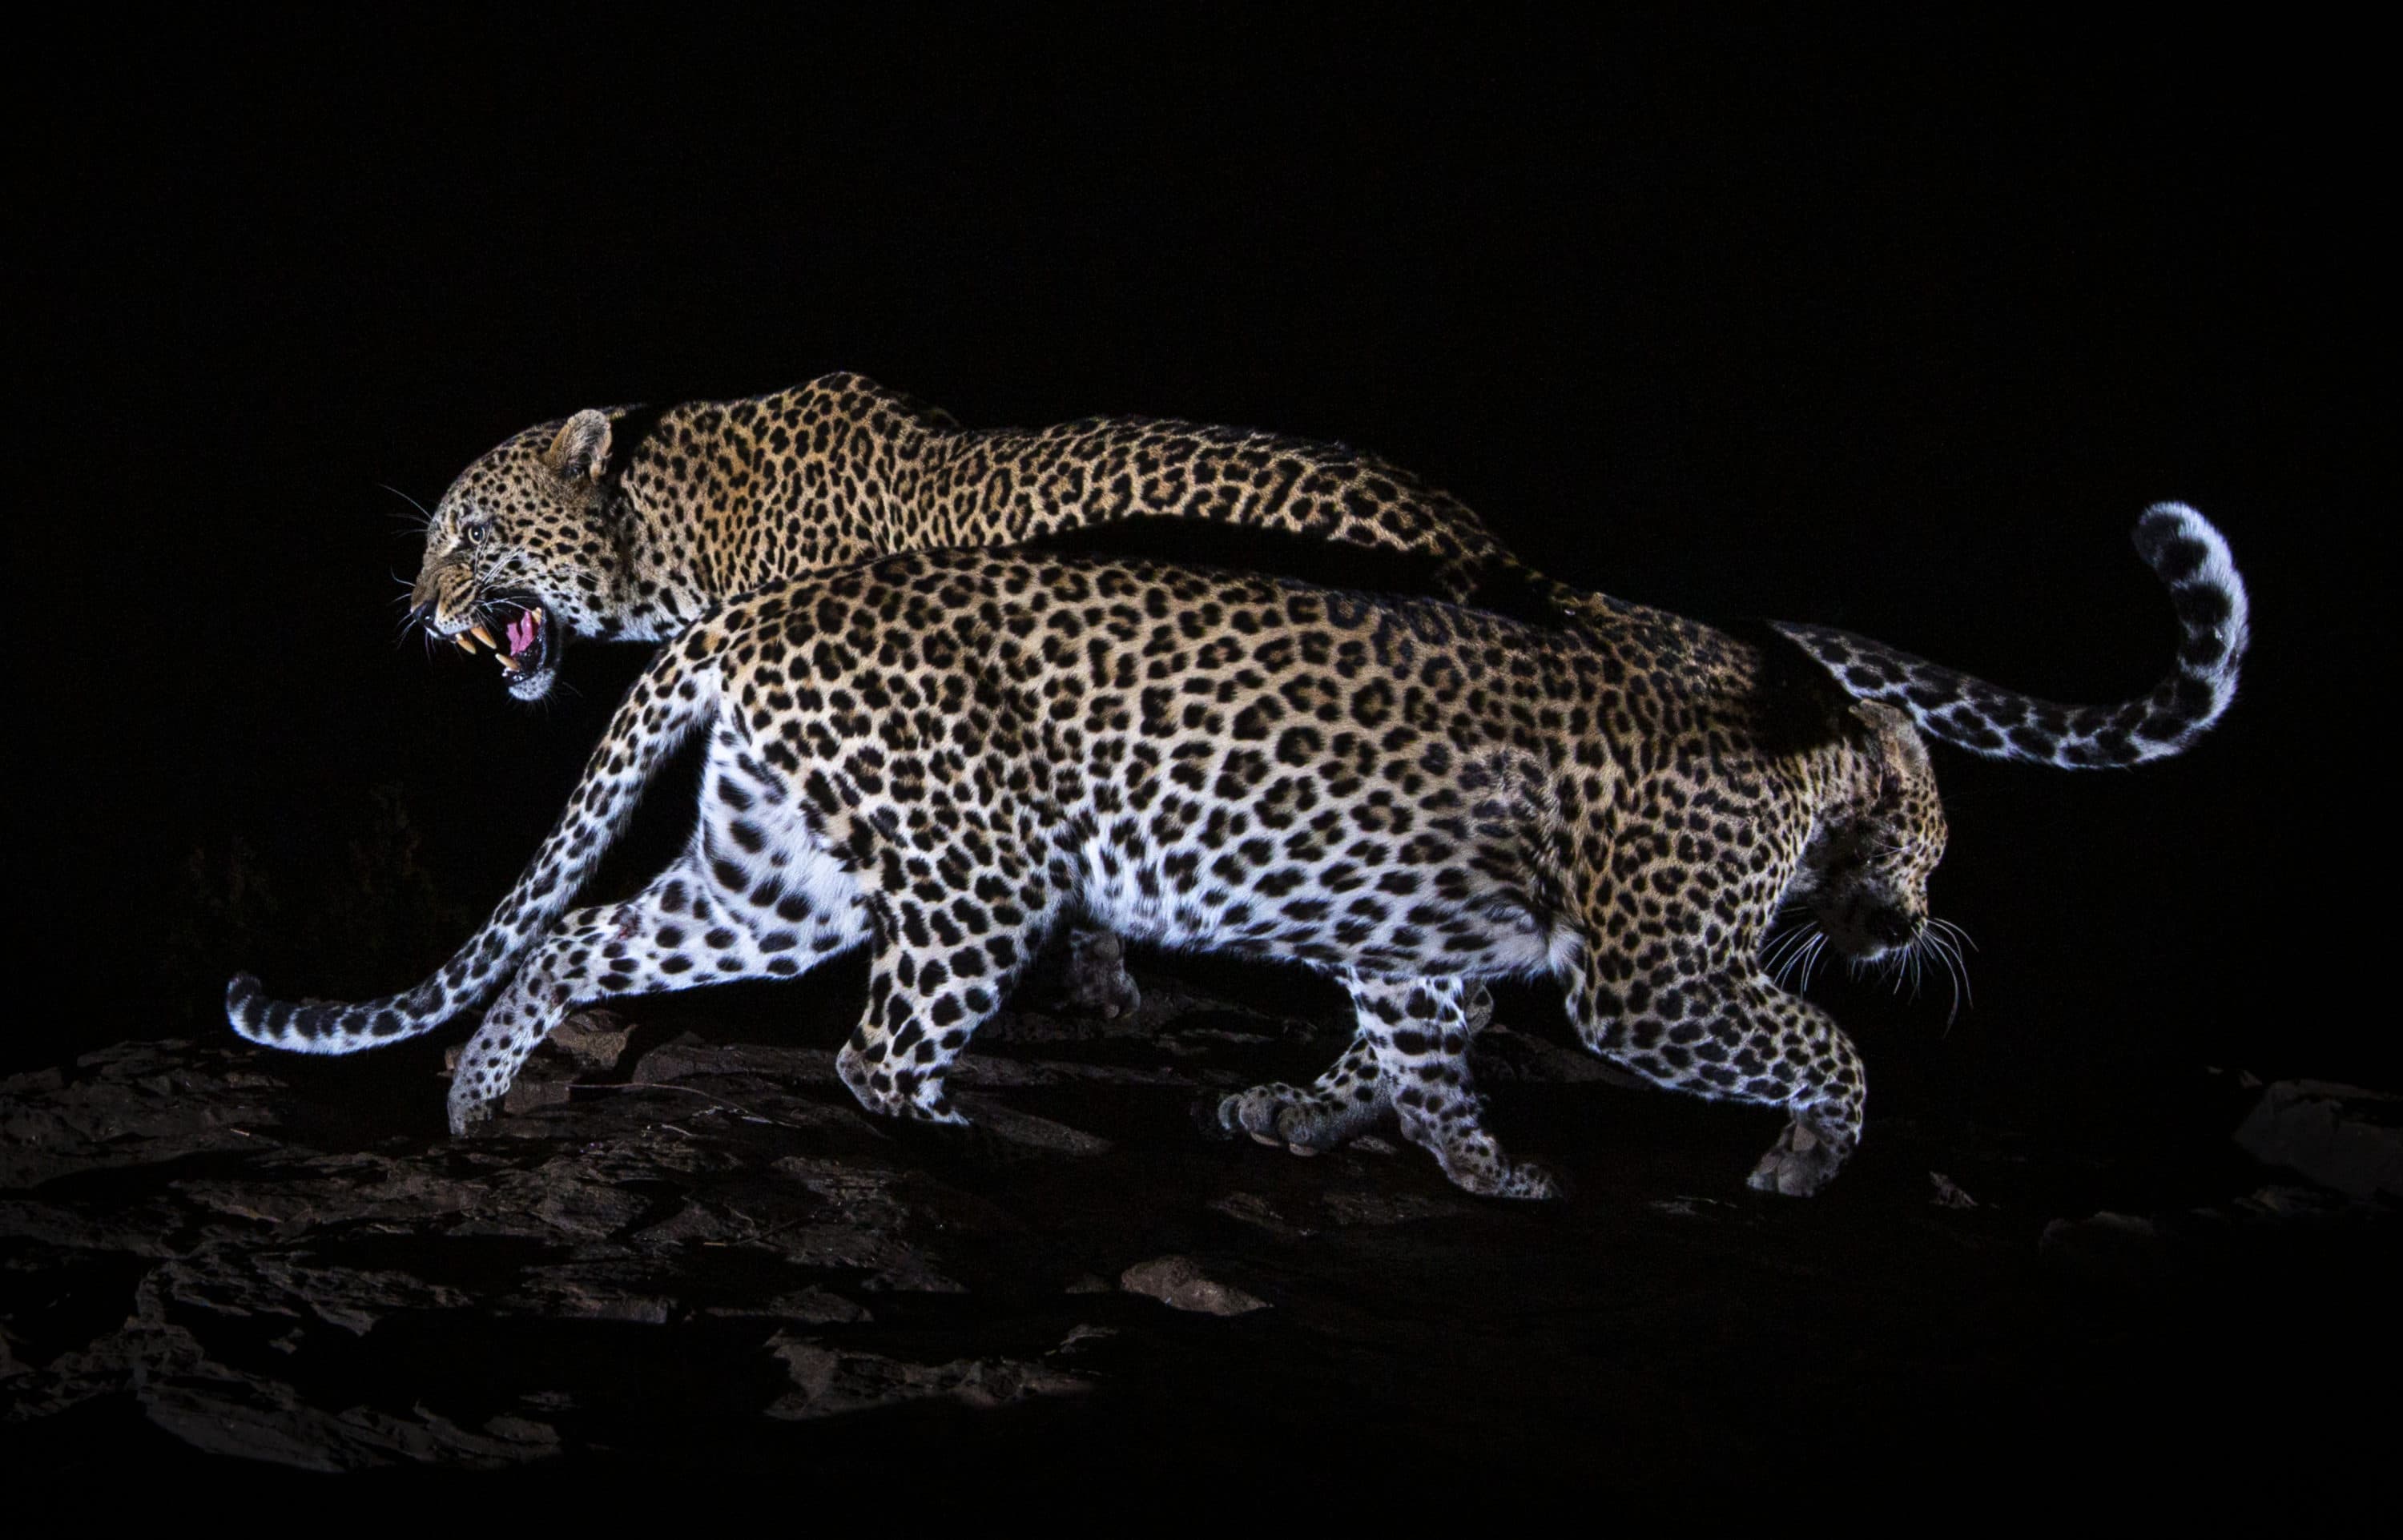 One Photographer's Pursuit To Capture Pictures Of The Elusive